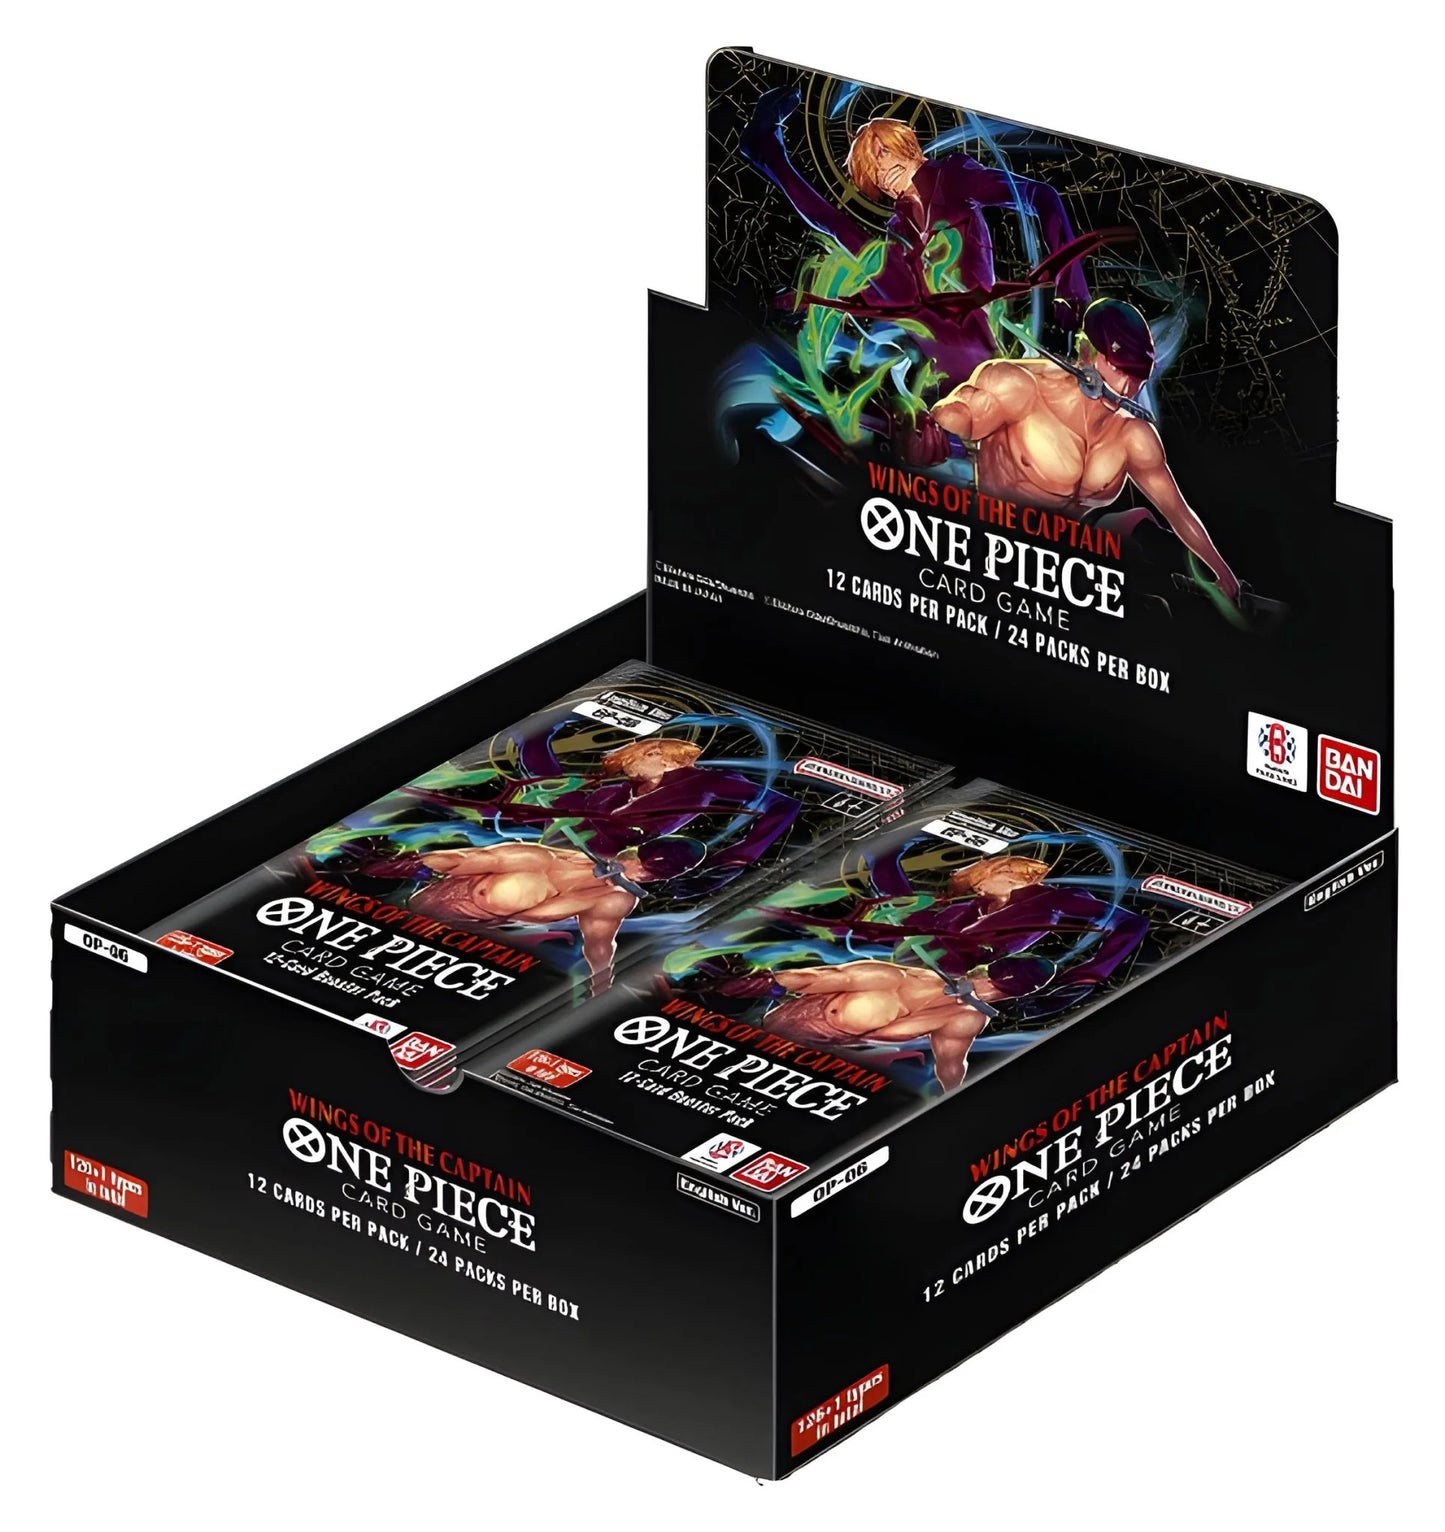 One Piece Wings of the Captain (OP06) Booster Box